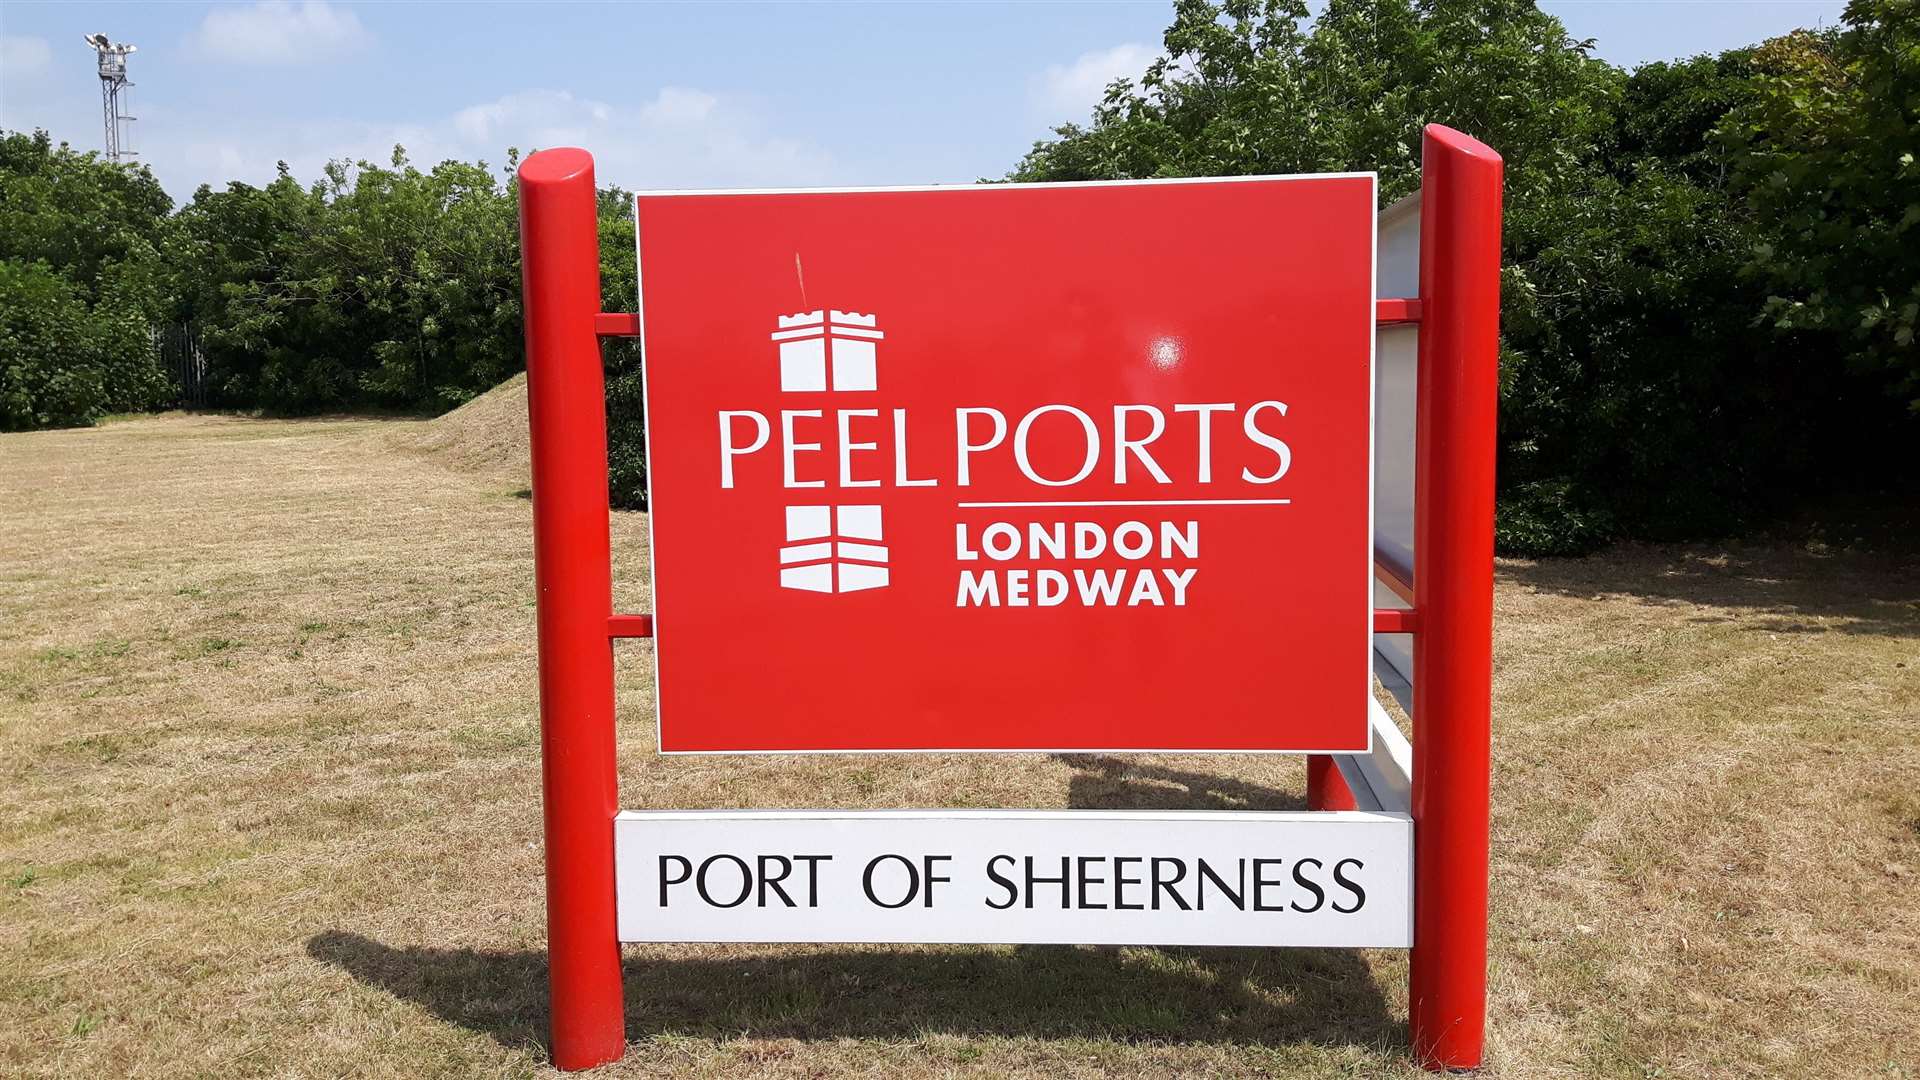 Peel Ports, in Sheerness, were fined £60,000 following the 2018 incident